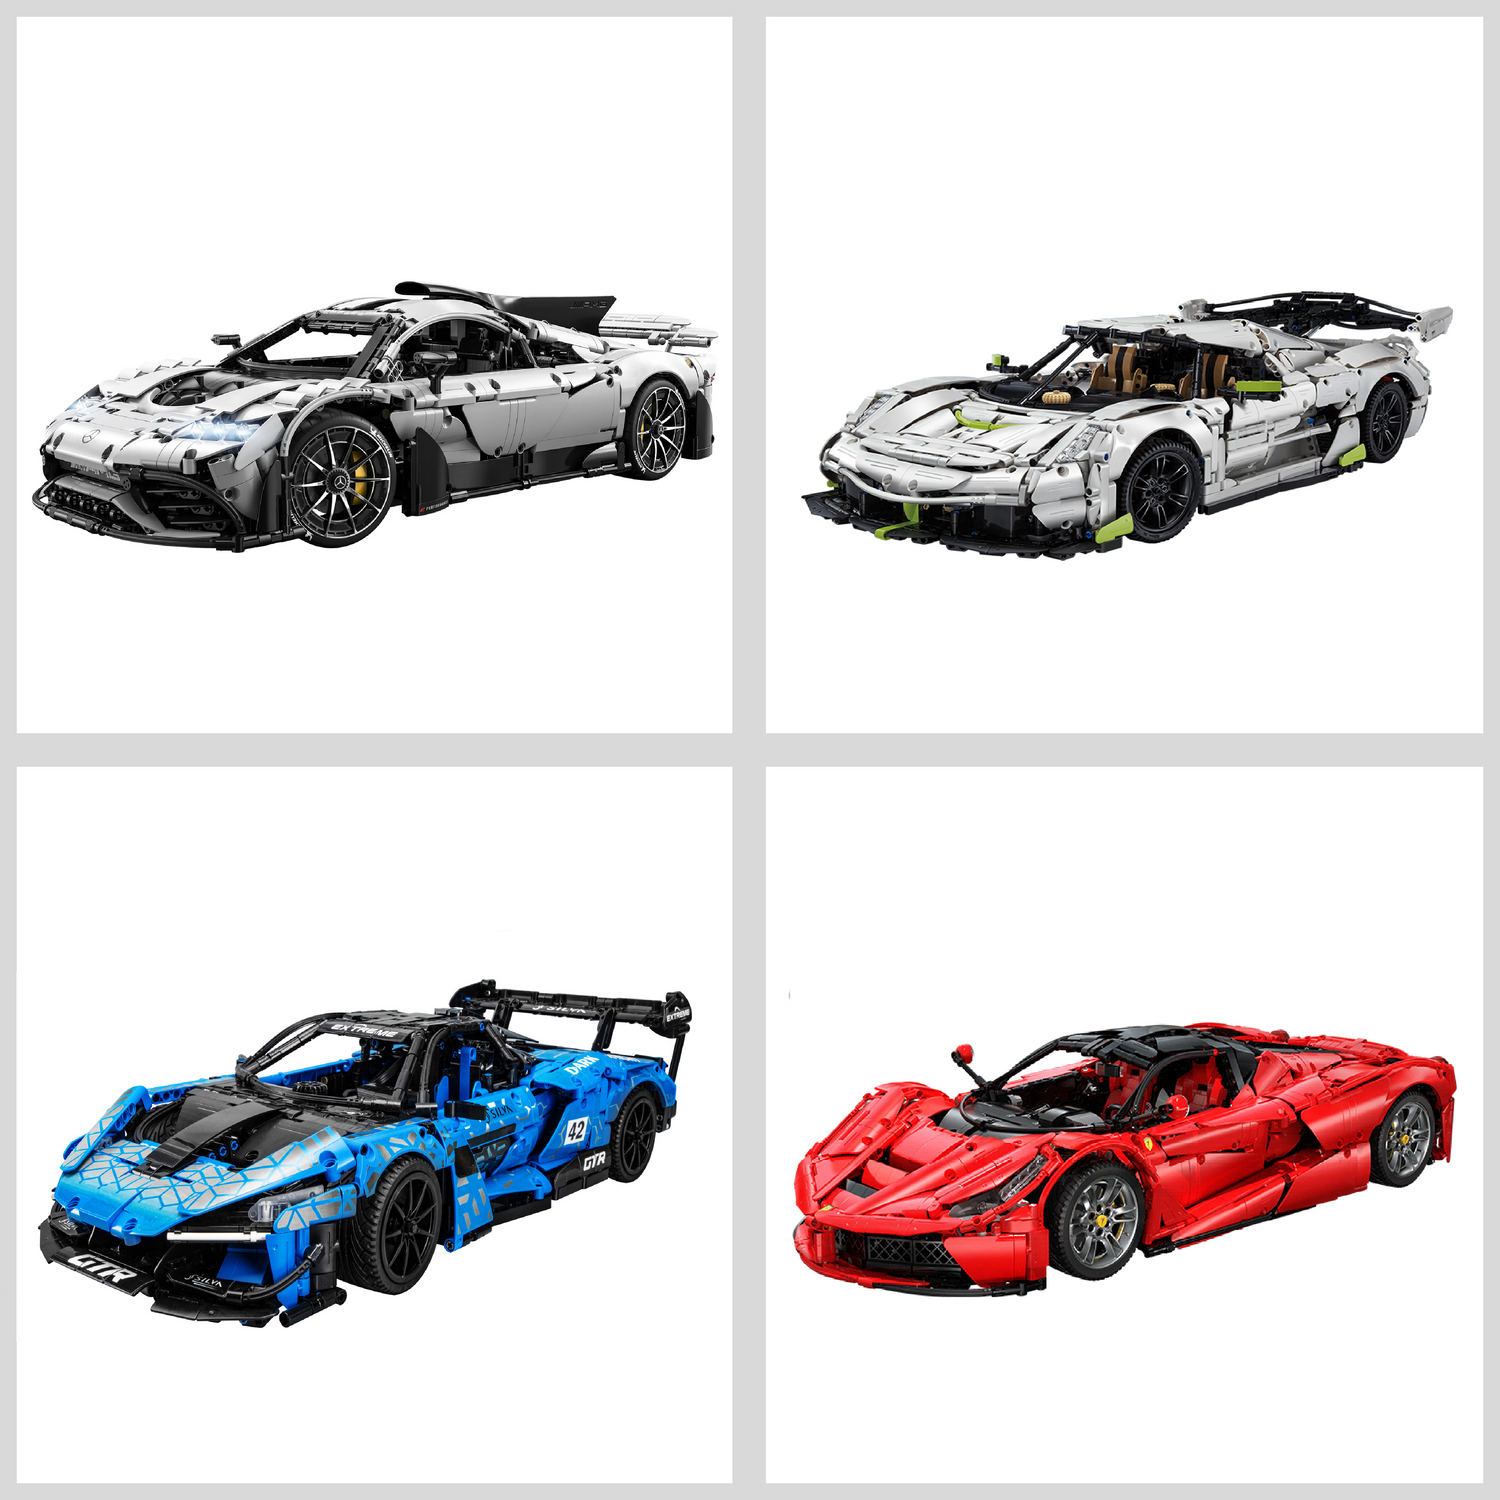 CaDA Supercars with RC